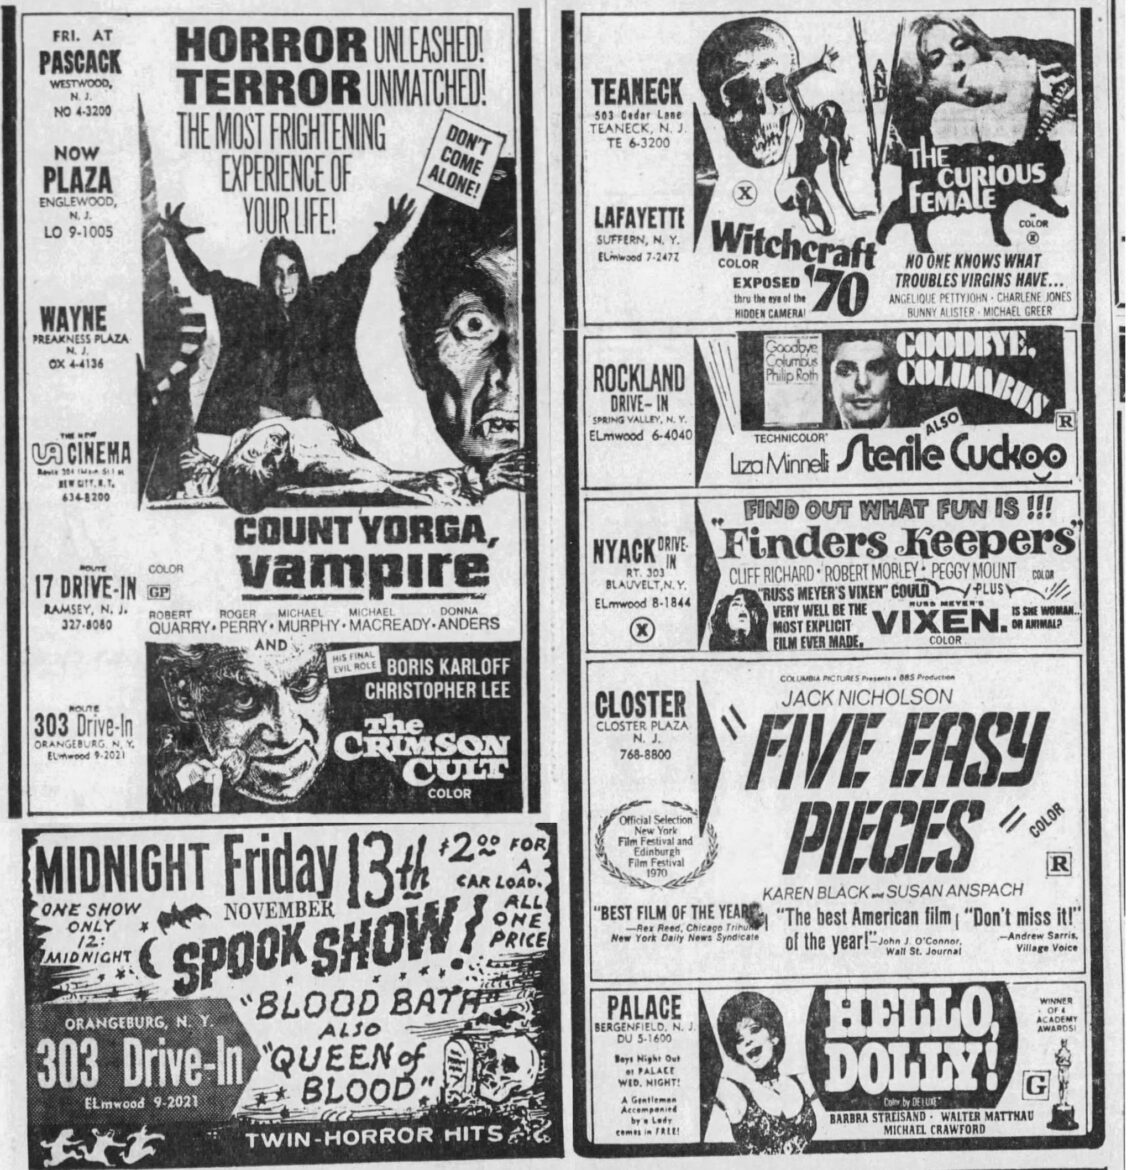 Newspaper Ad for Count Yorga, Vampire